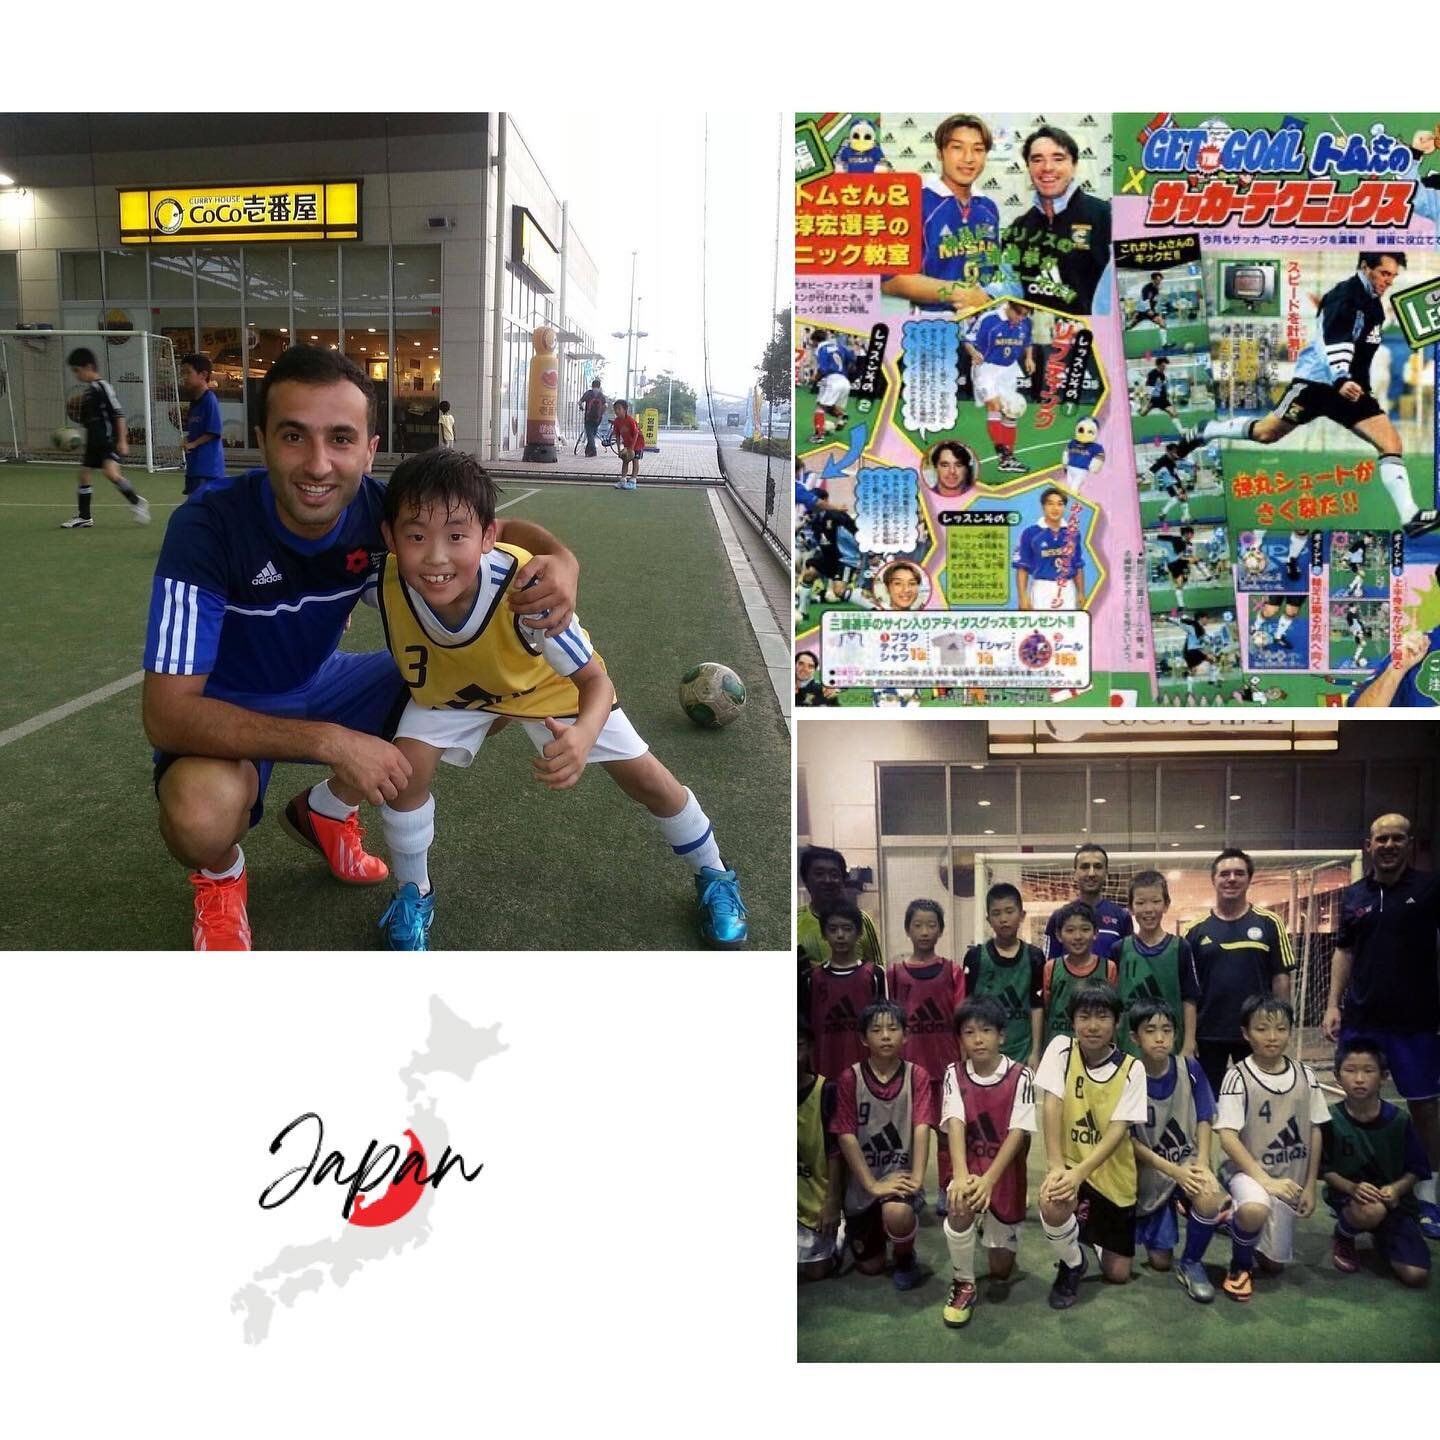 This picture was taken in Chiba, Japan 9 years ago today.

I had been running business alongside my co-founder Matt Sim for two years and was hungry to grow.

My ambition was to empower grassroots football and have the best education. There was an en